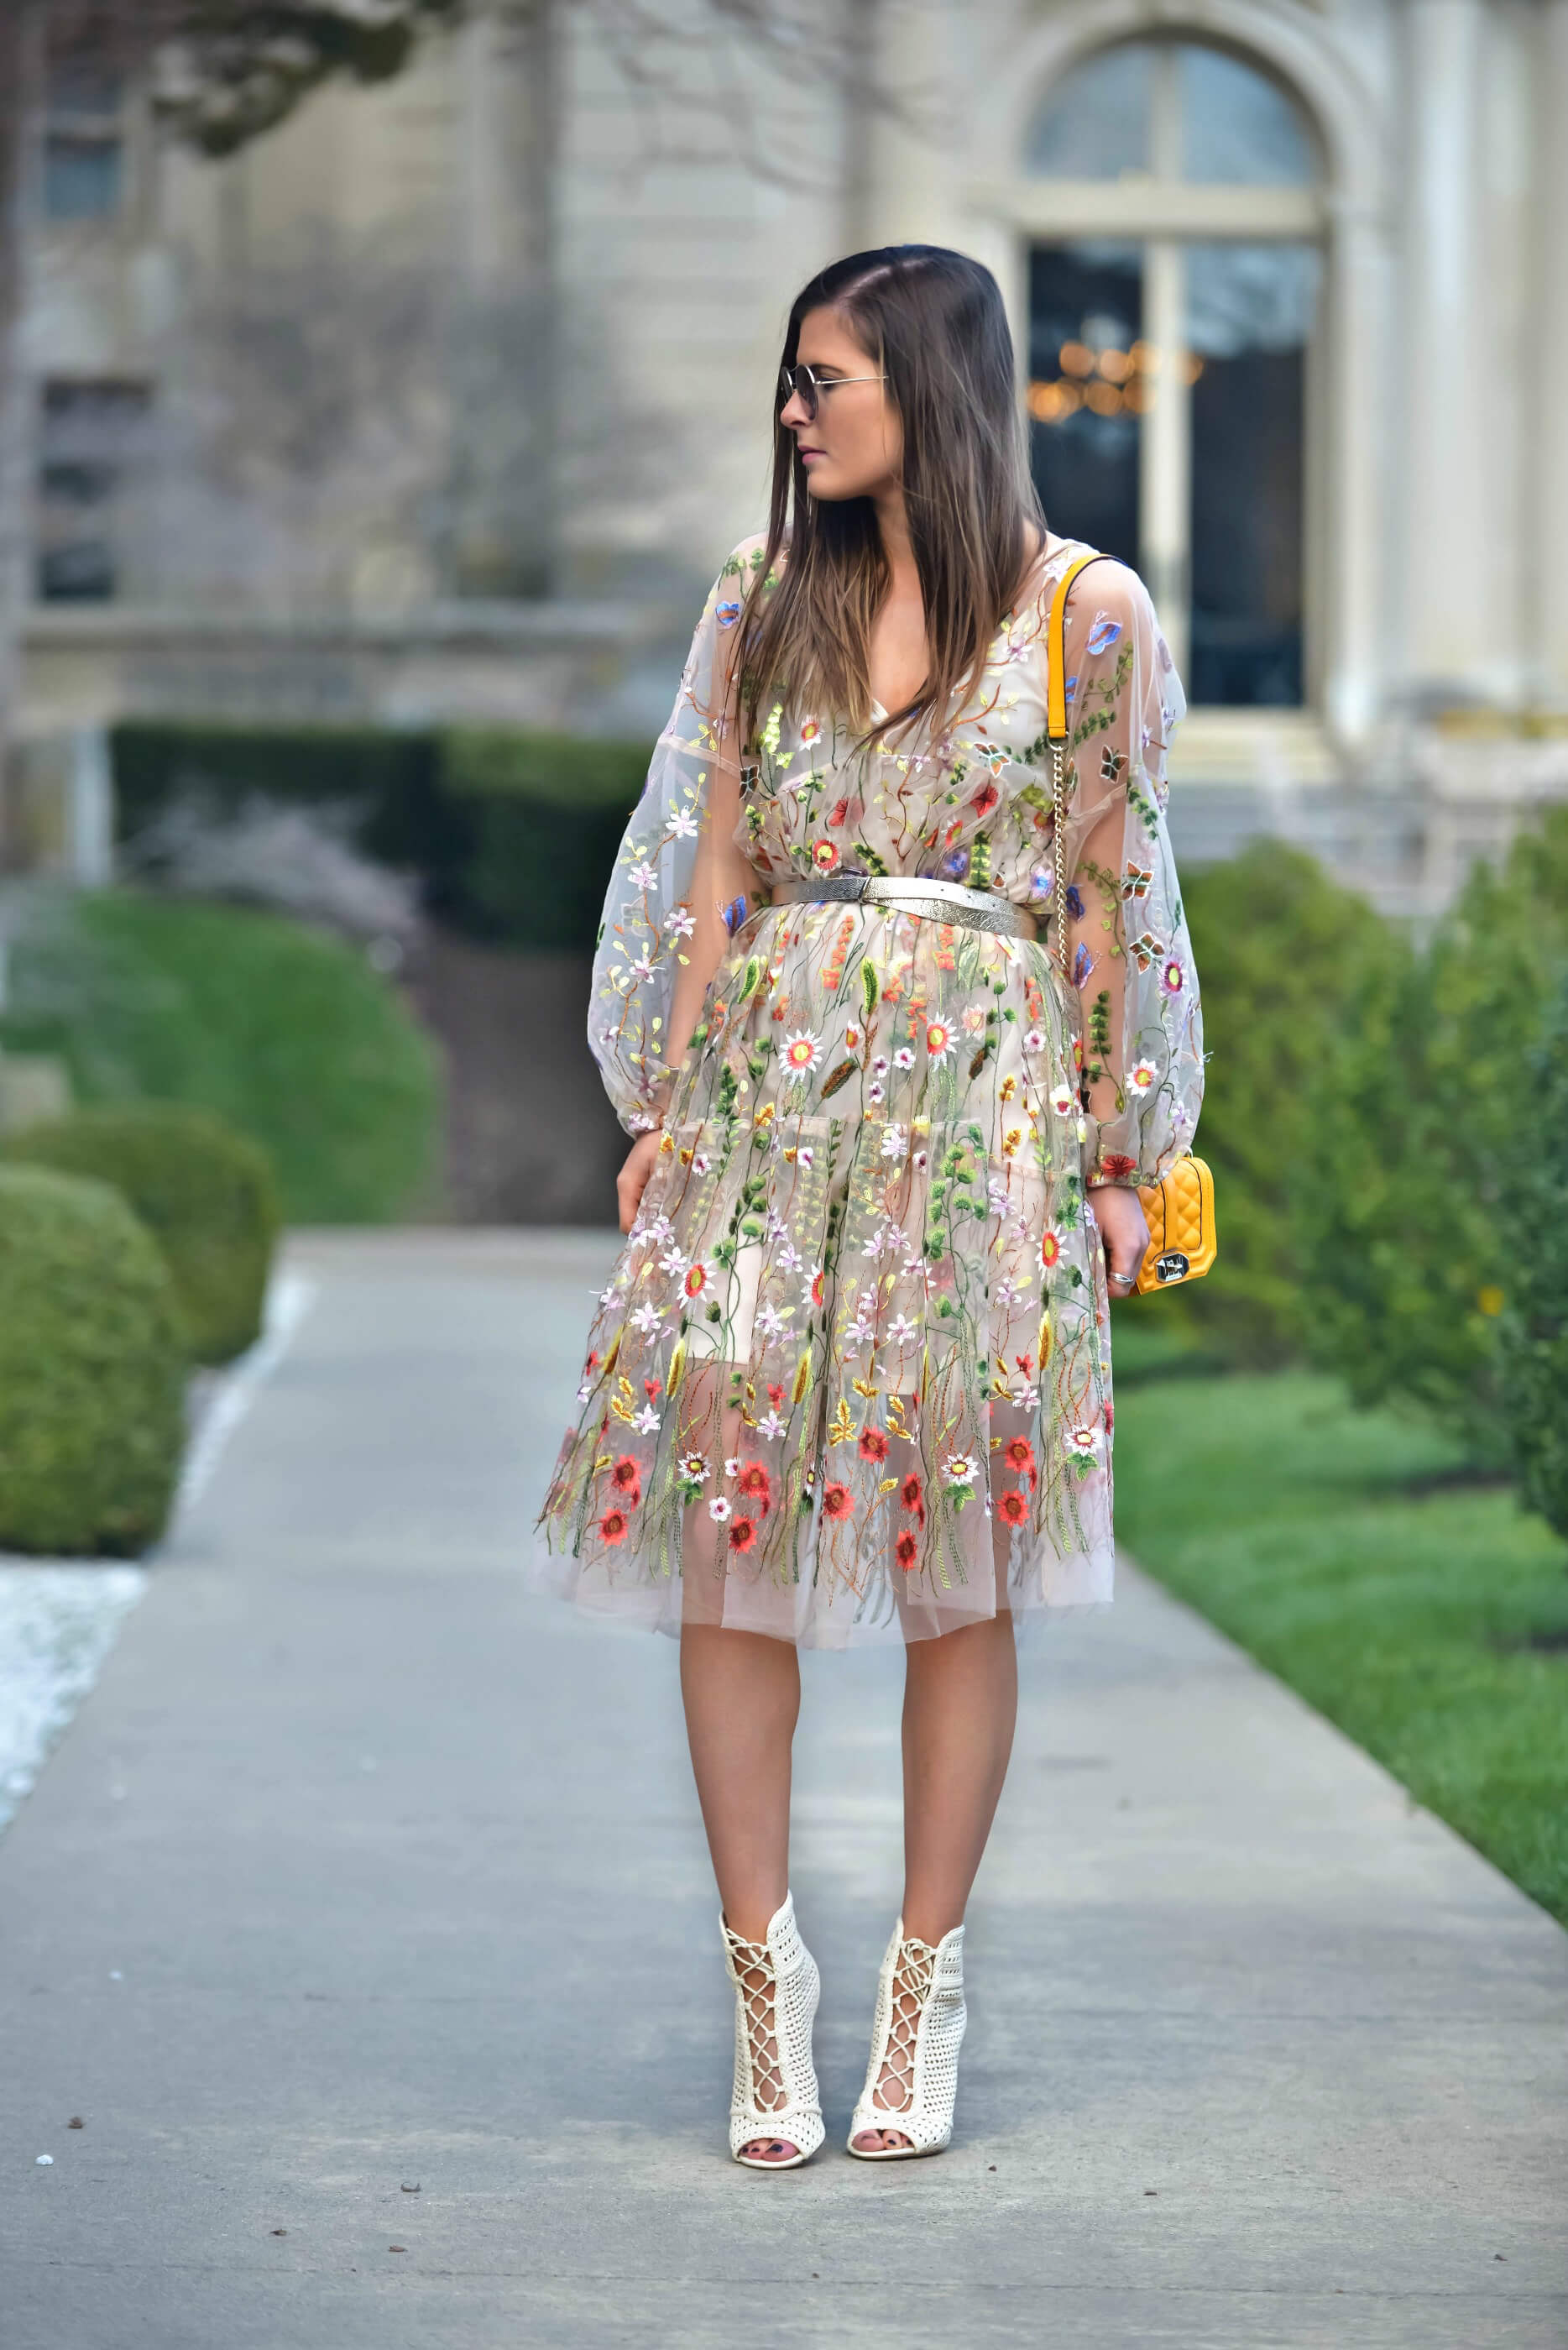 h&m embroidered dress